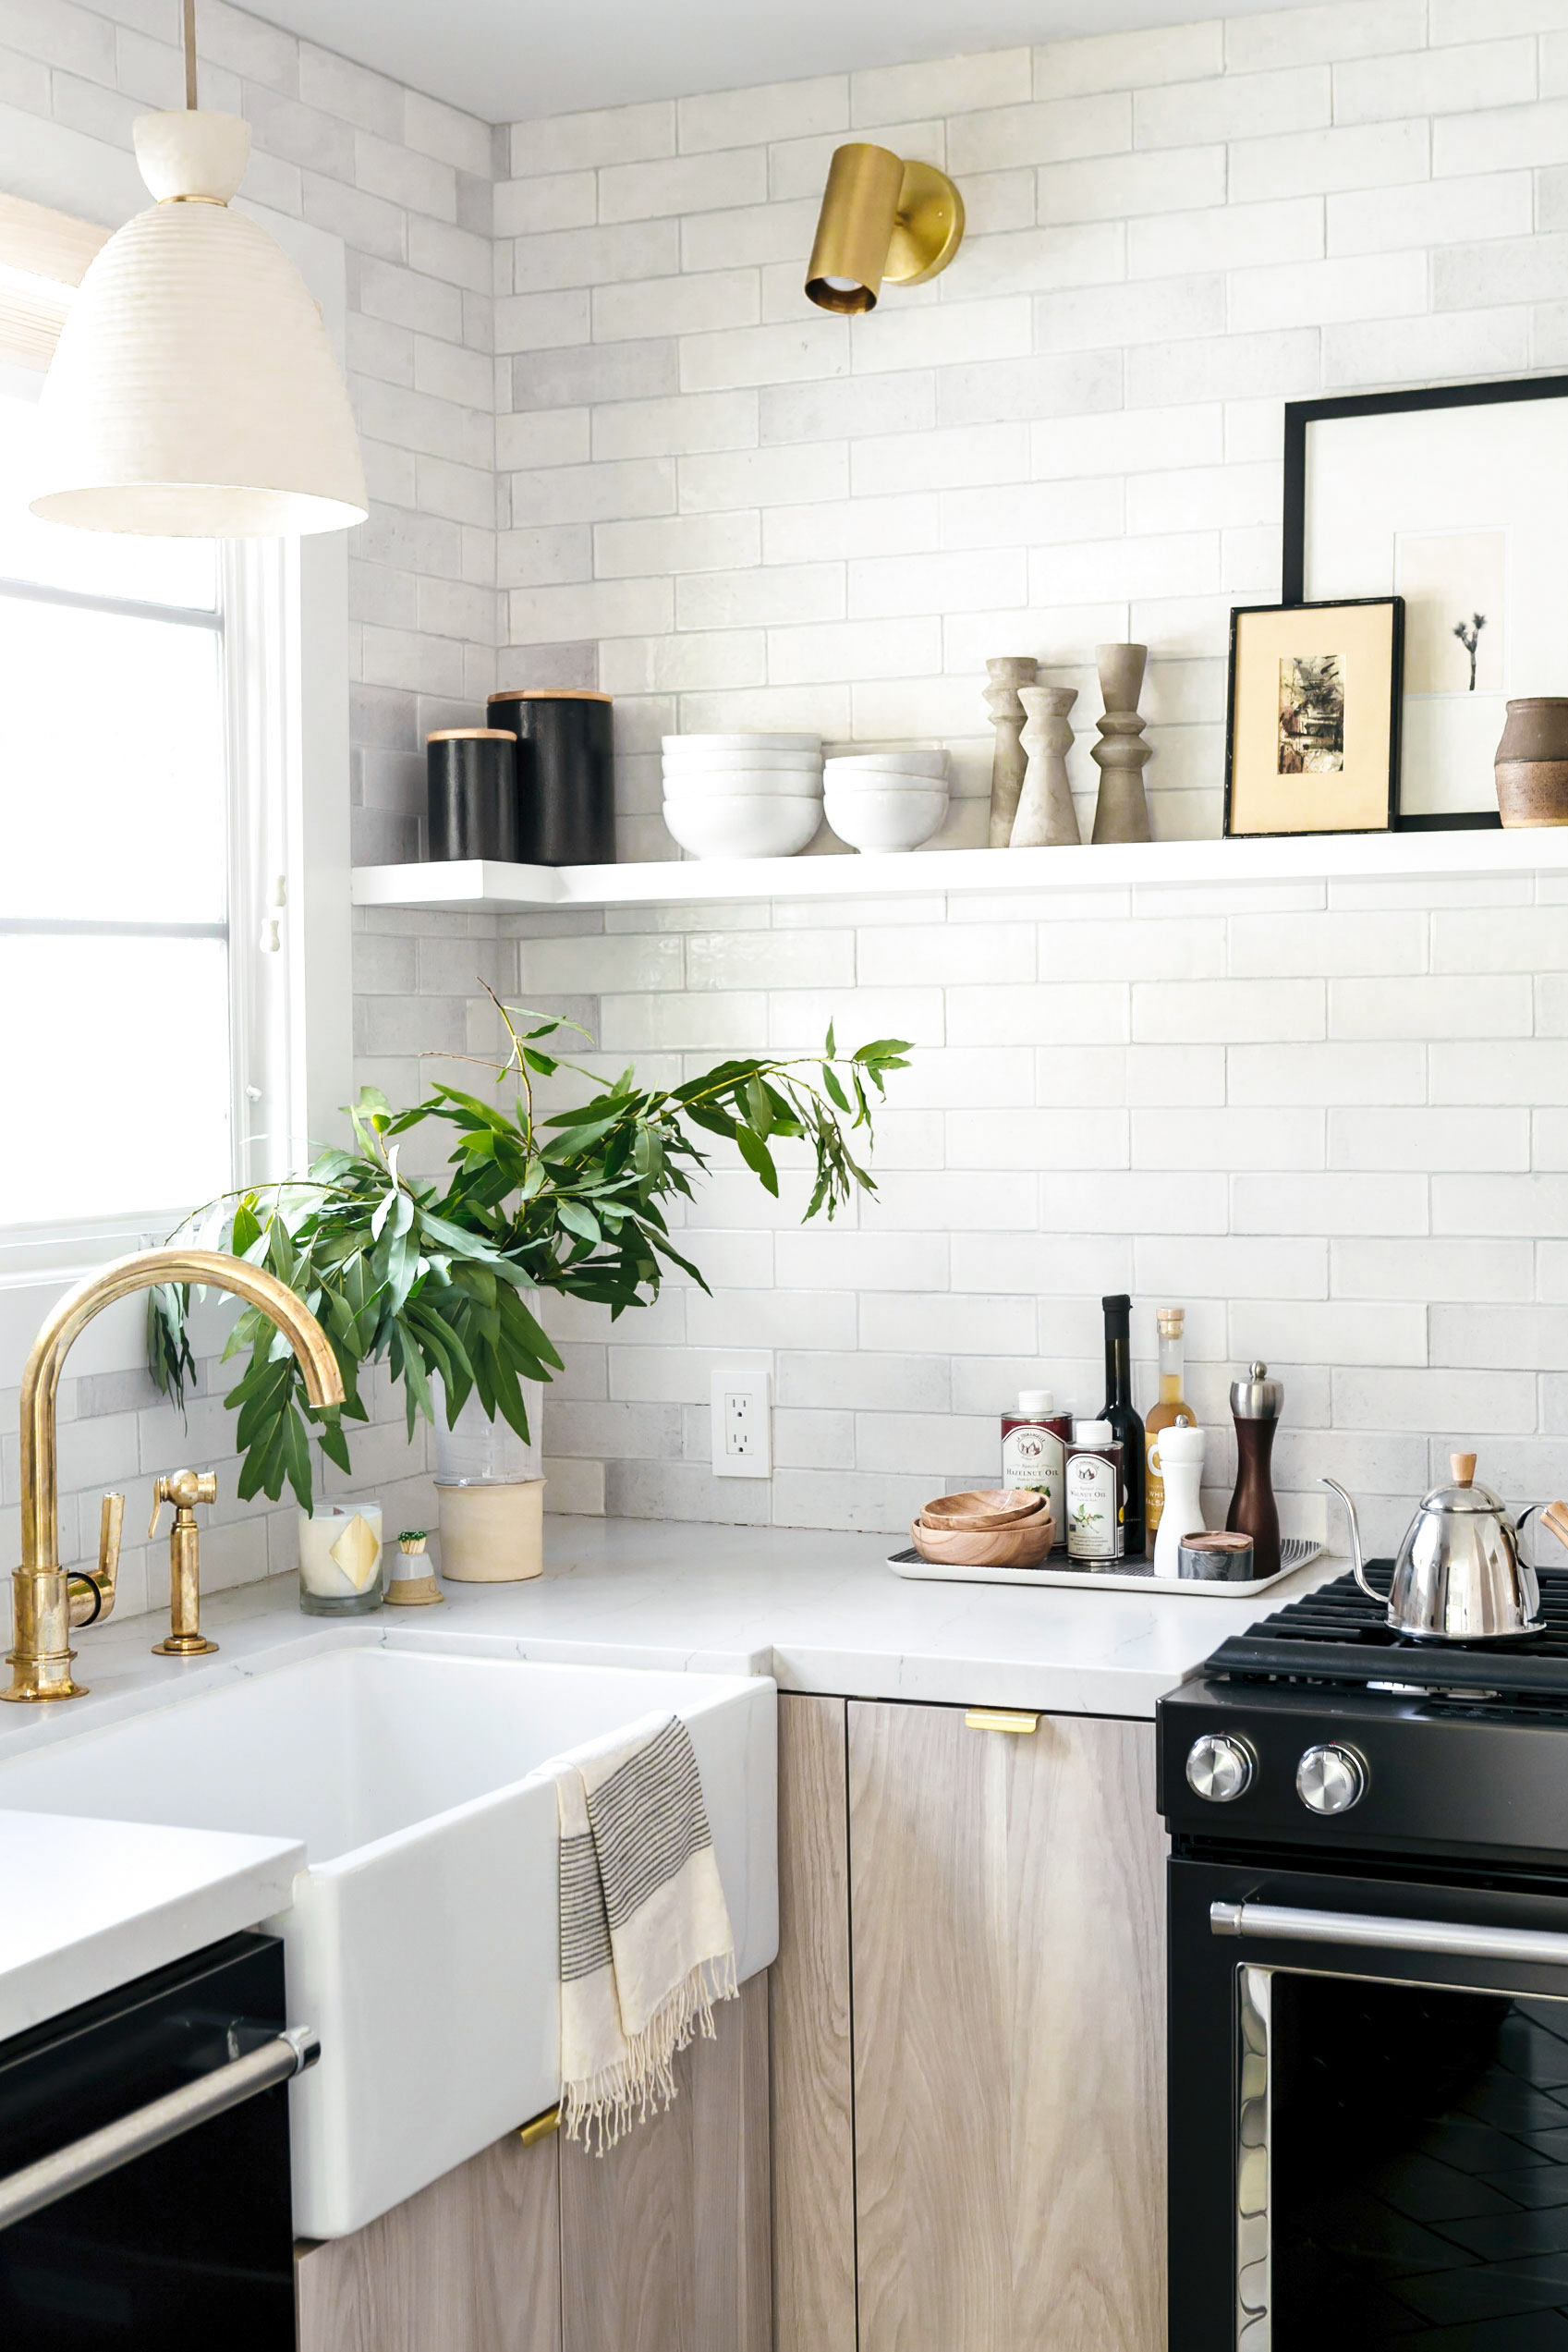 Our Kitchen Reno: Ceramic Pendant Light + Brass Hardware from ...